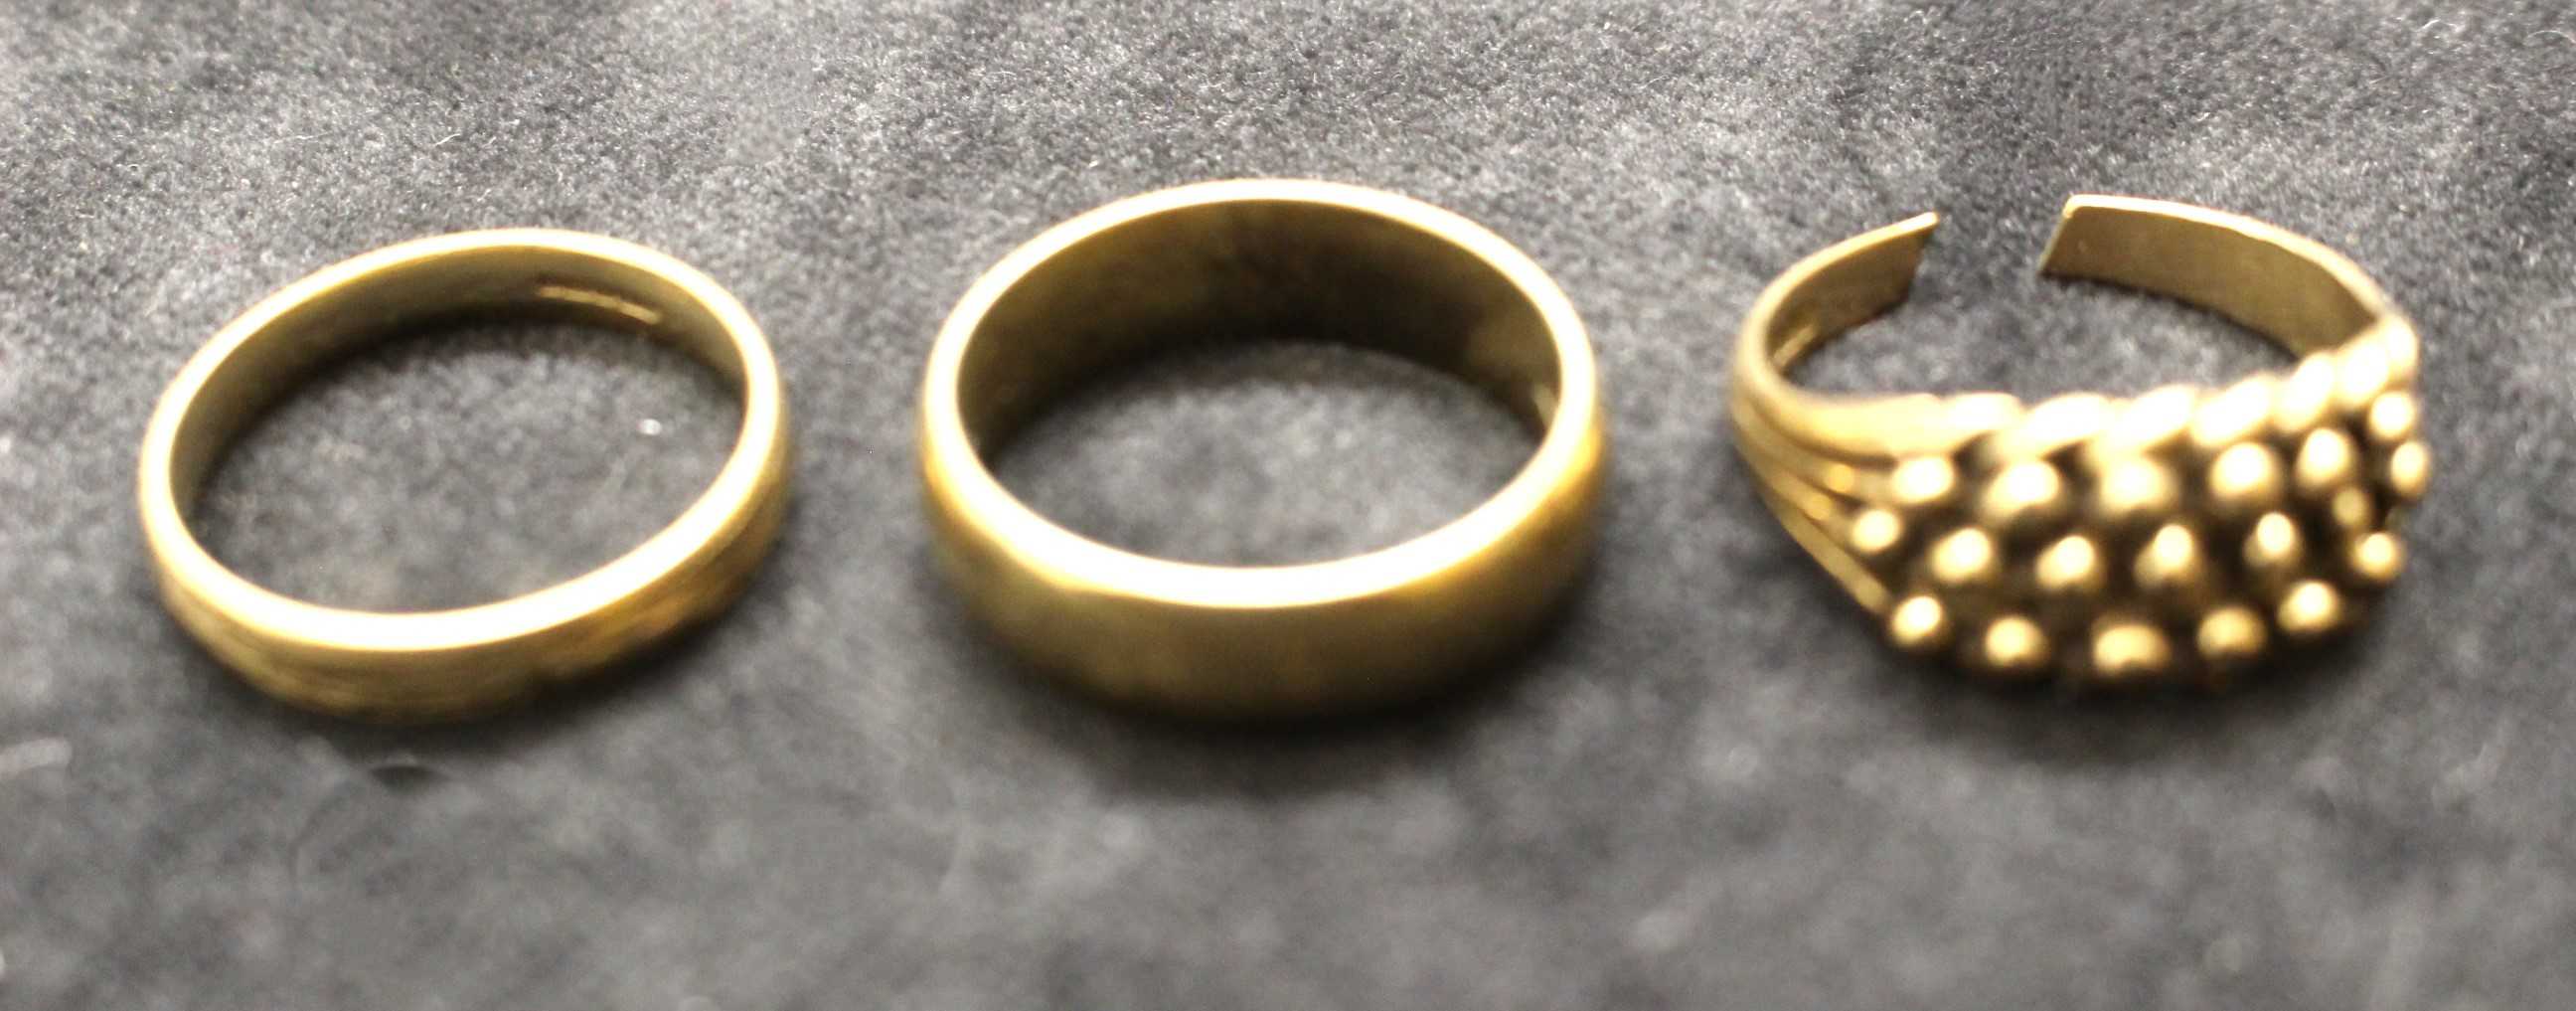 Three 9ct Gold rings. Two of them are weddings band. One of them is ring size S and the other one is